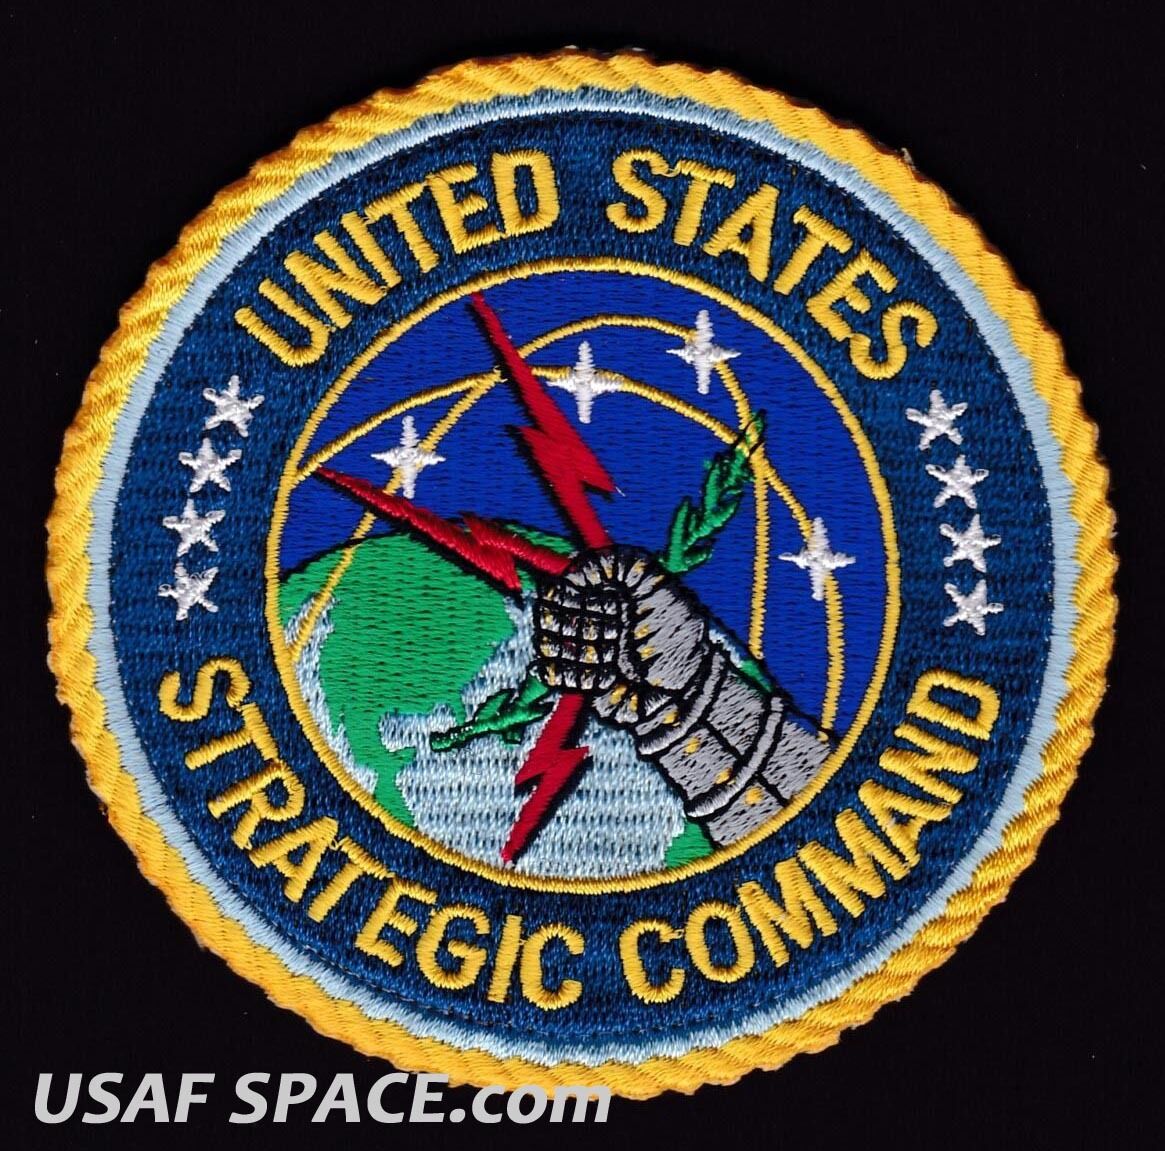  AUTHENTIC UNITED STATES STRATEGIC COMMAND MISSILE DEFENSE USAF VEL PATCH